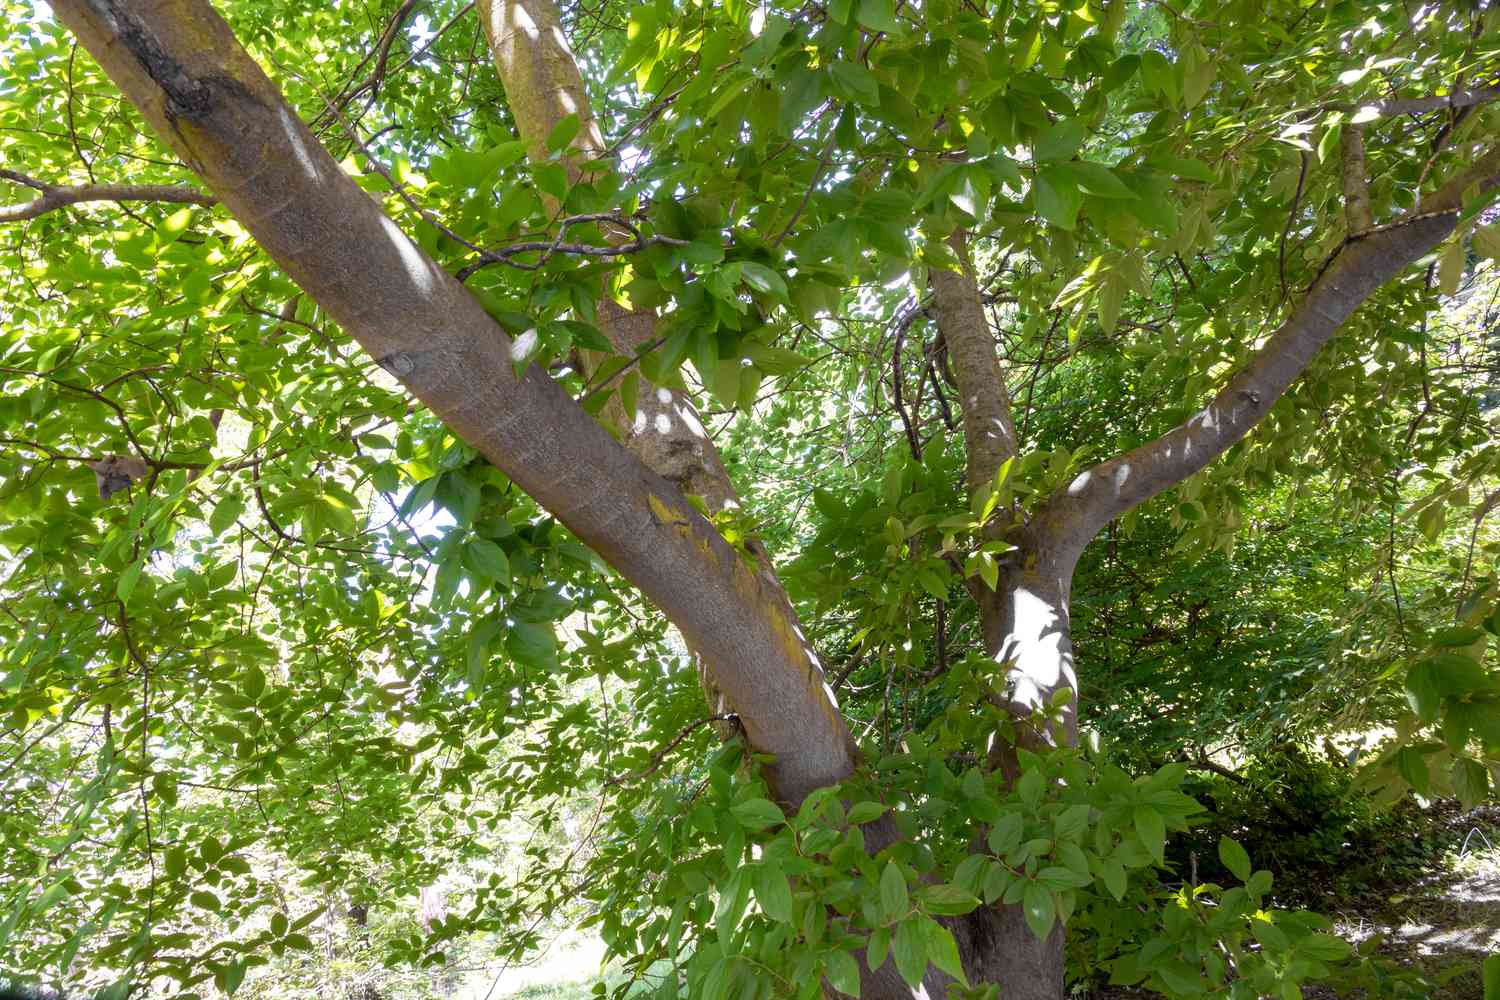 Netleaf hackberry tree with gray furrowed trunks surrounded by leaves